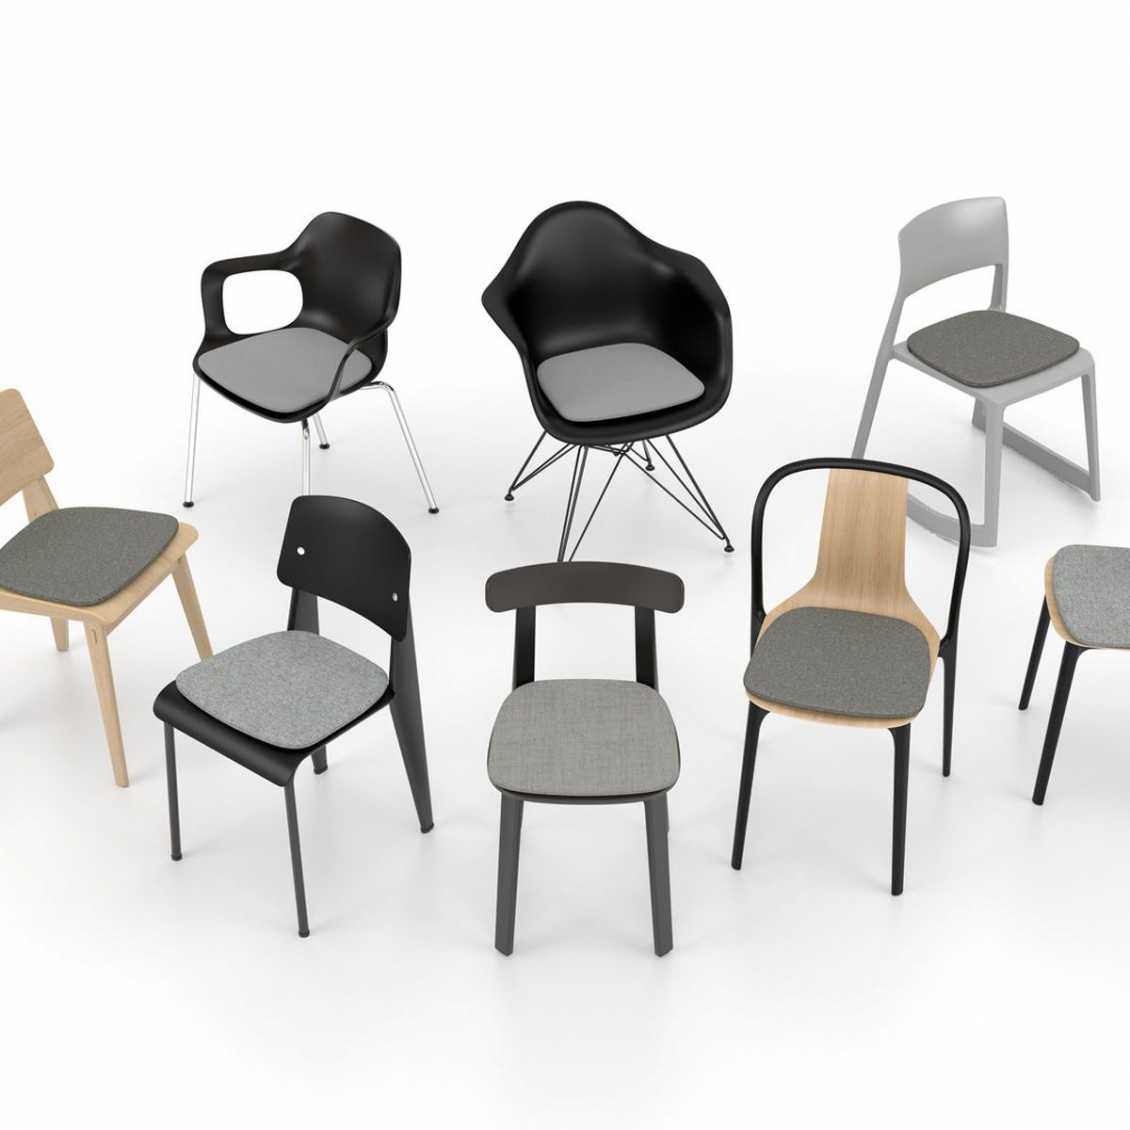 https://www.fundesign.nl/media/catalog/product/6/1/6140445_soft-seats-type-a_-matching-chairs_v_fullbleed_1440x_3.jpg